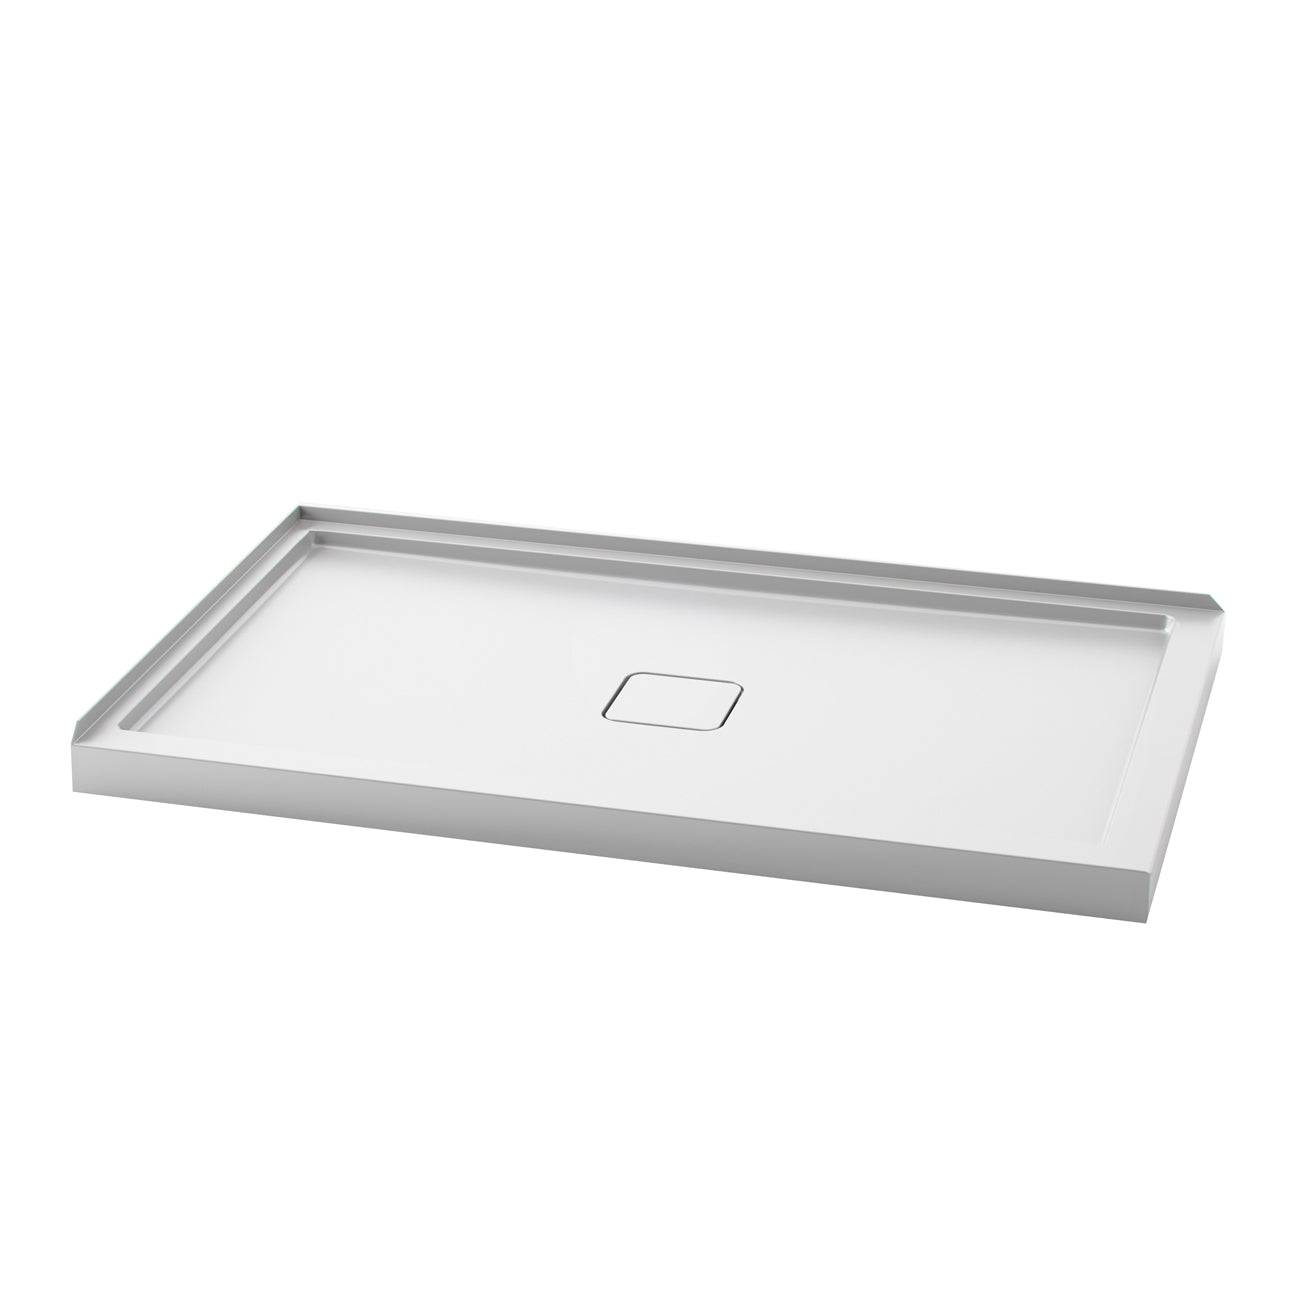 Kalia KOVER 60" x 36" Rectangular Acrylic Shower Base with Central Drain and Left Integrated Tiling Flange on 2 sides